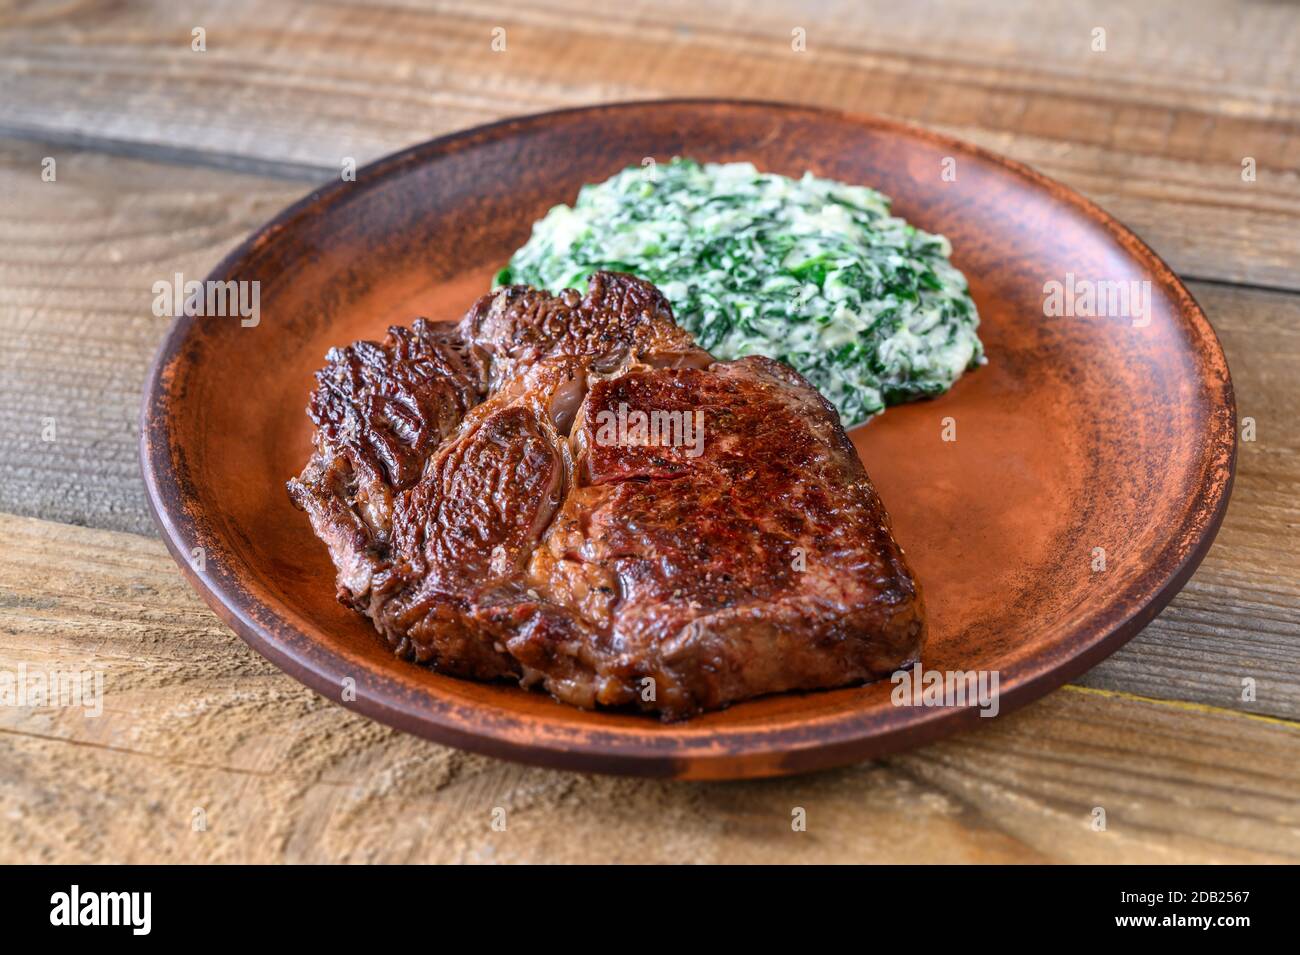 Beef steak with creamy spinach close up Stock Photo